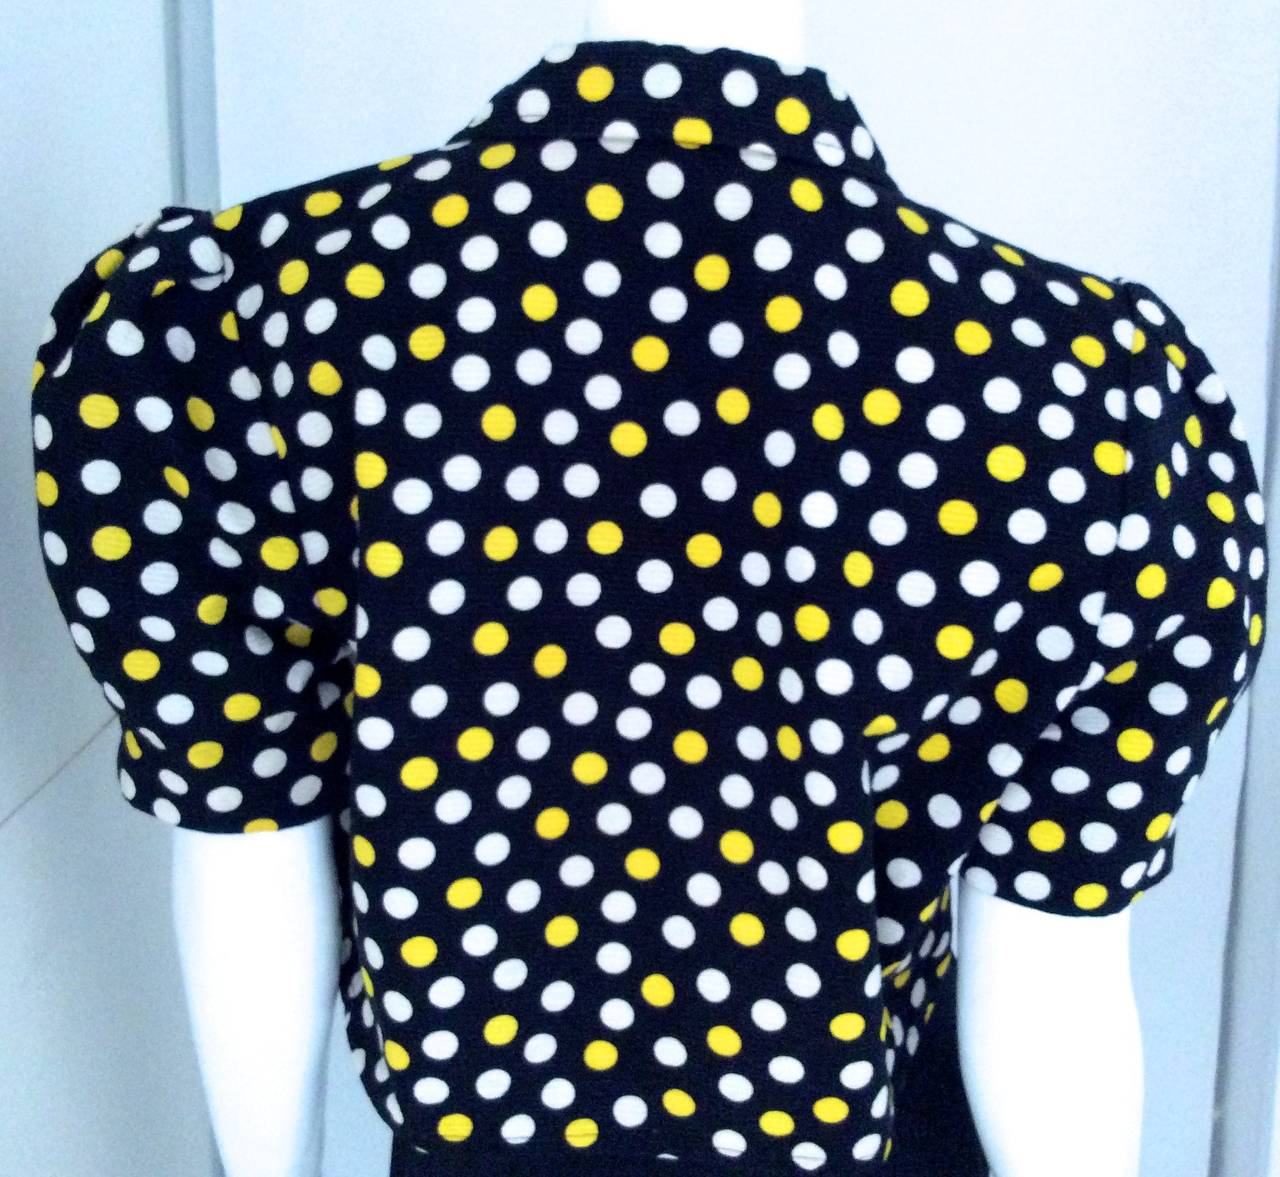 1980's cotton polka dot bolero. Gorgeous St. Laurent style bolero. Excellent condition. Dark navy blue bolero with white and yellow polka dots. 

Total length - 18 inches
Shoulder to shoulder not including puppy sleeve 15 inches
Shoulder to